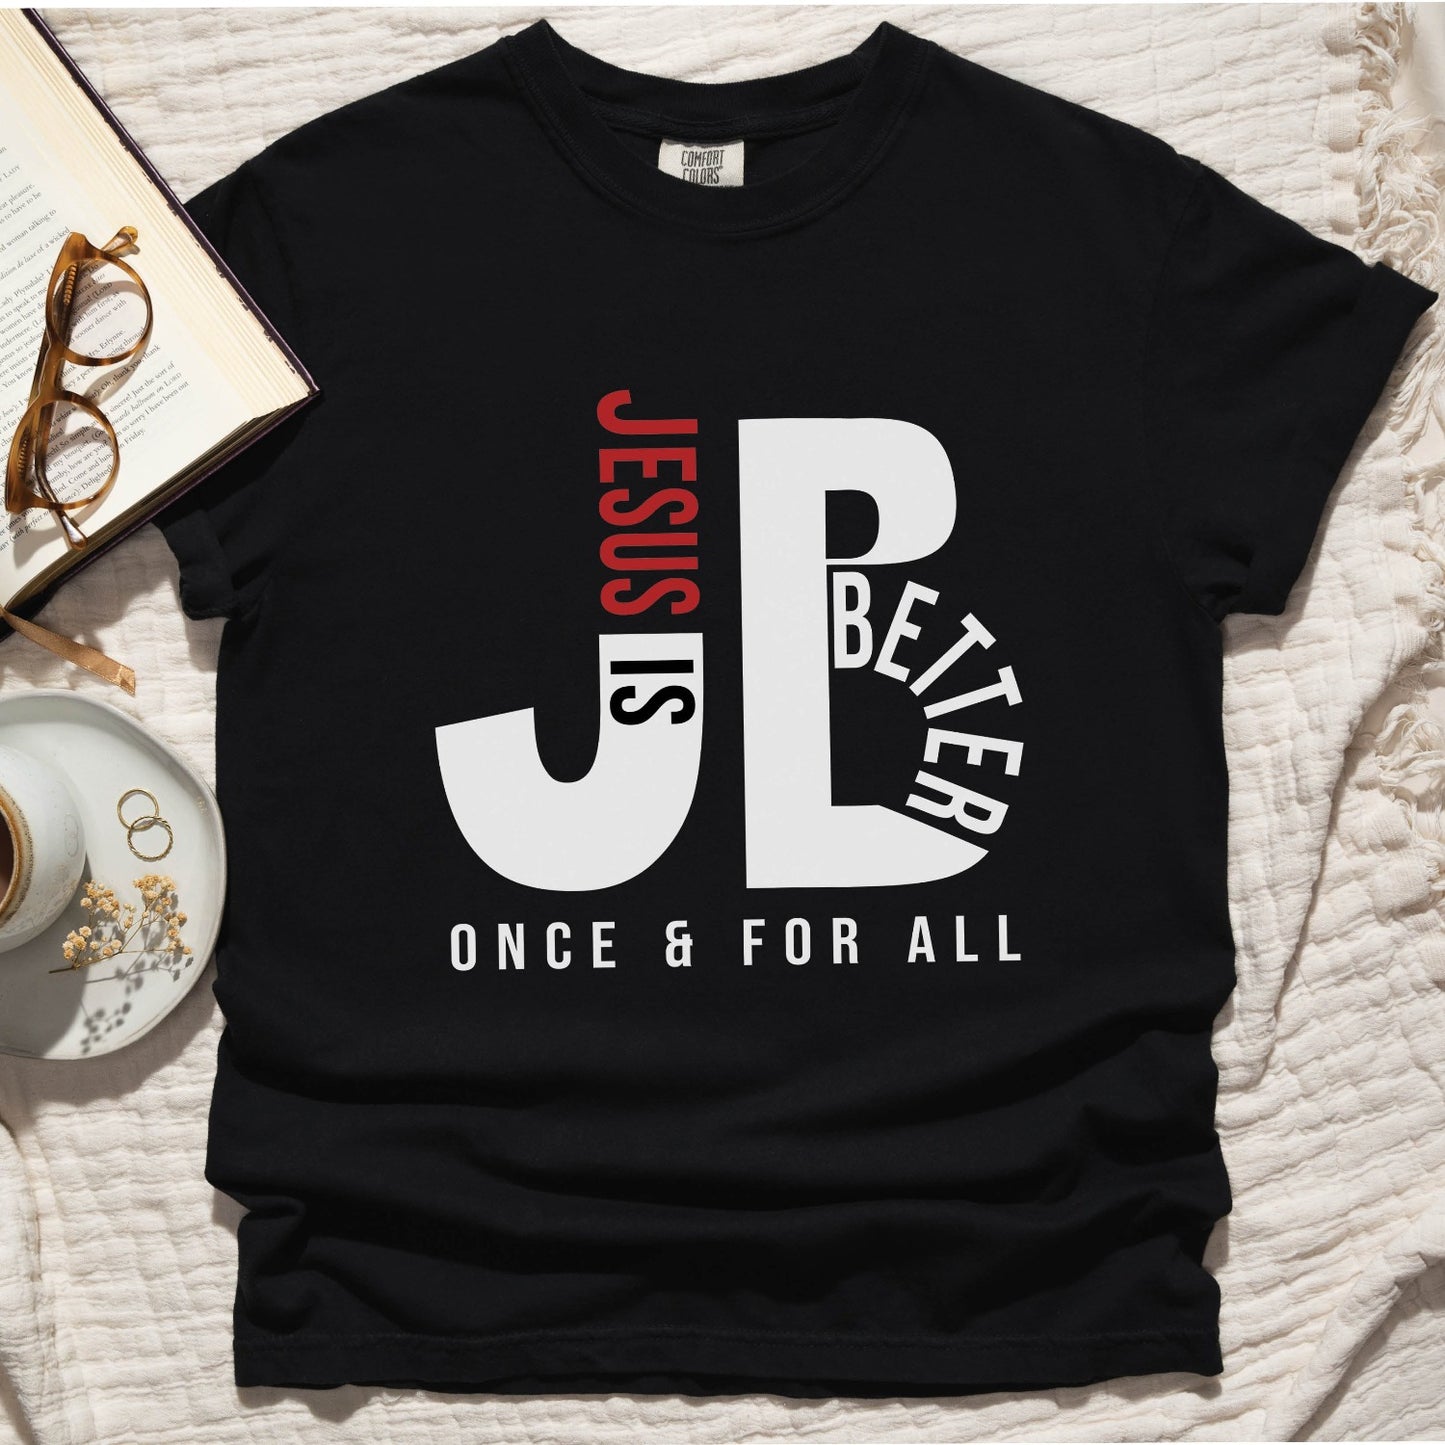 "JB" typography "Jesus is Better Once and For All" design in white and red, Christian, based on the bible book of Hebrews, printed on a black color Unisex Comfort Colors C1717 t-shirt, with Jesus in red letters, created for faith-based women and men